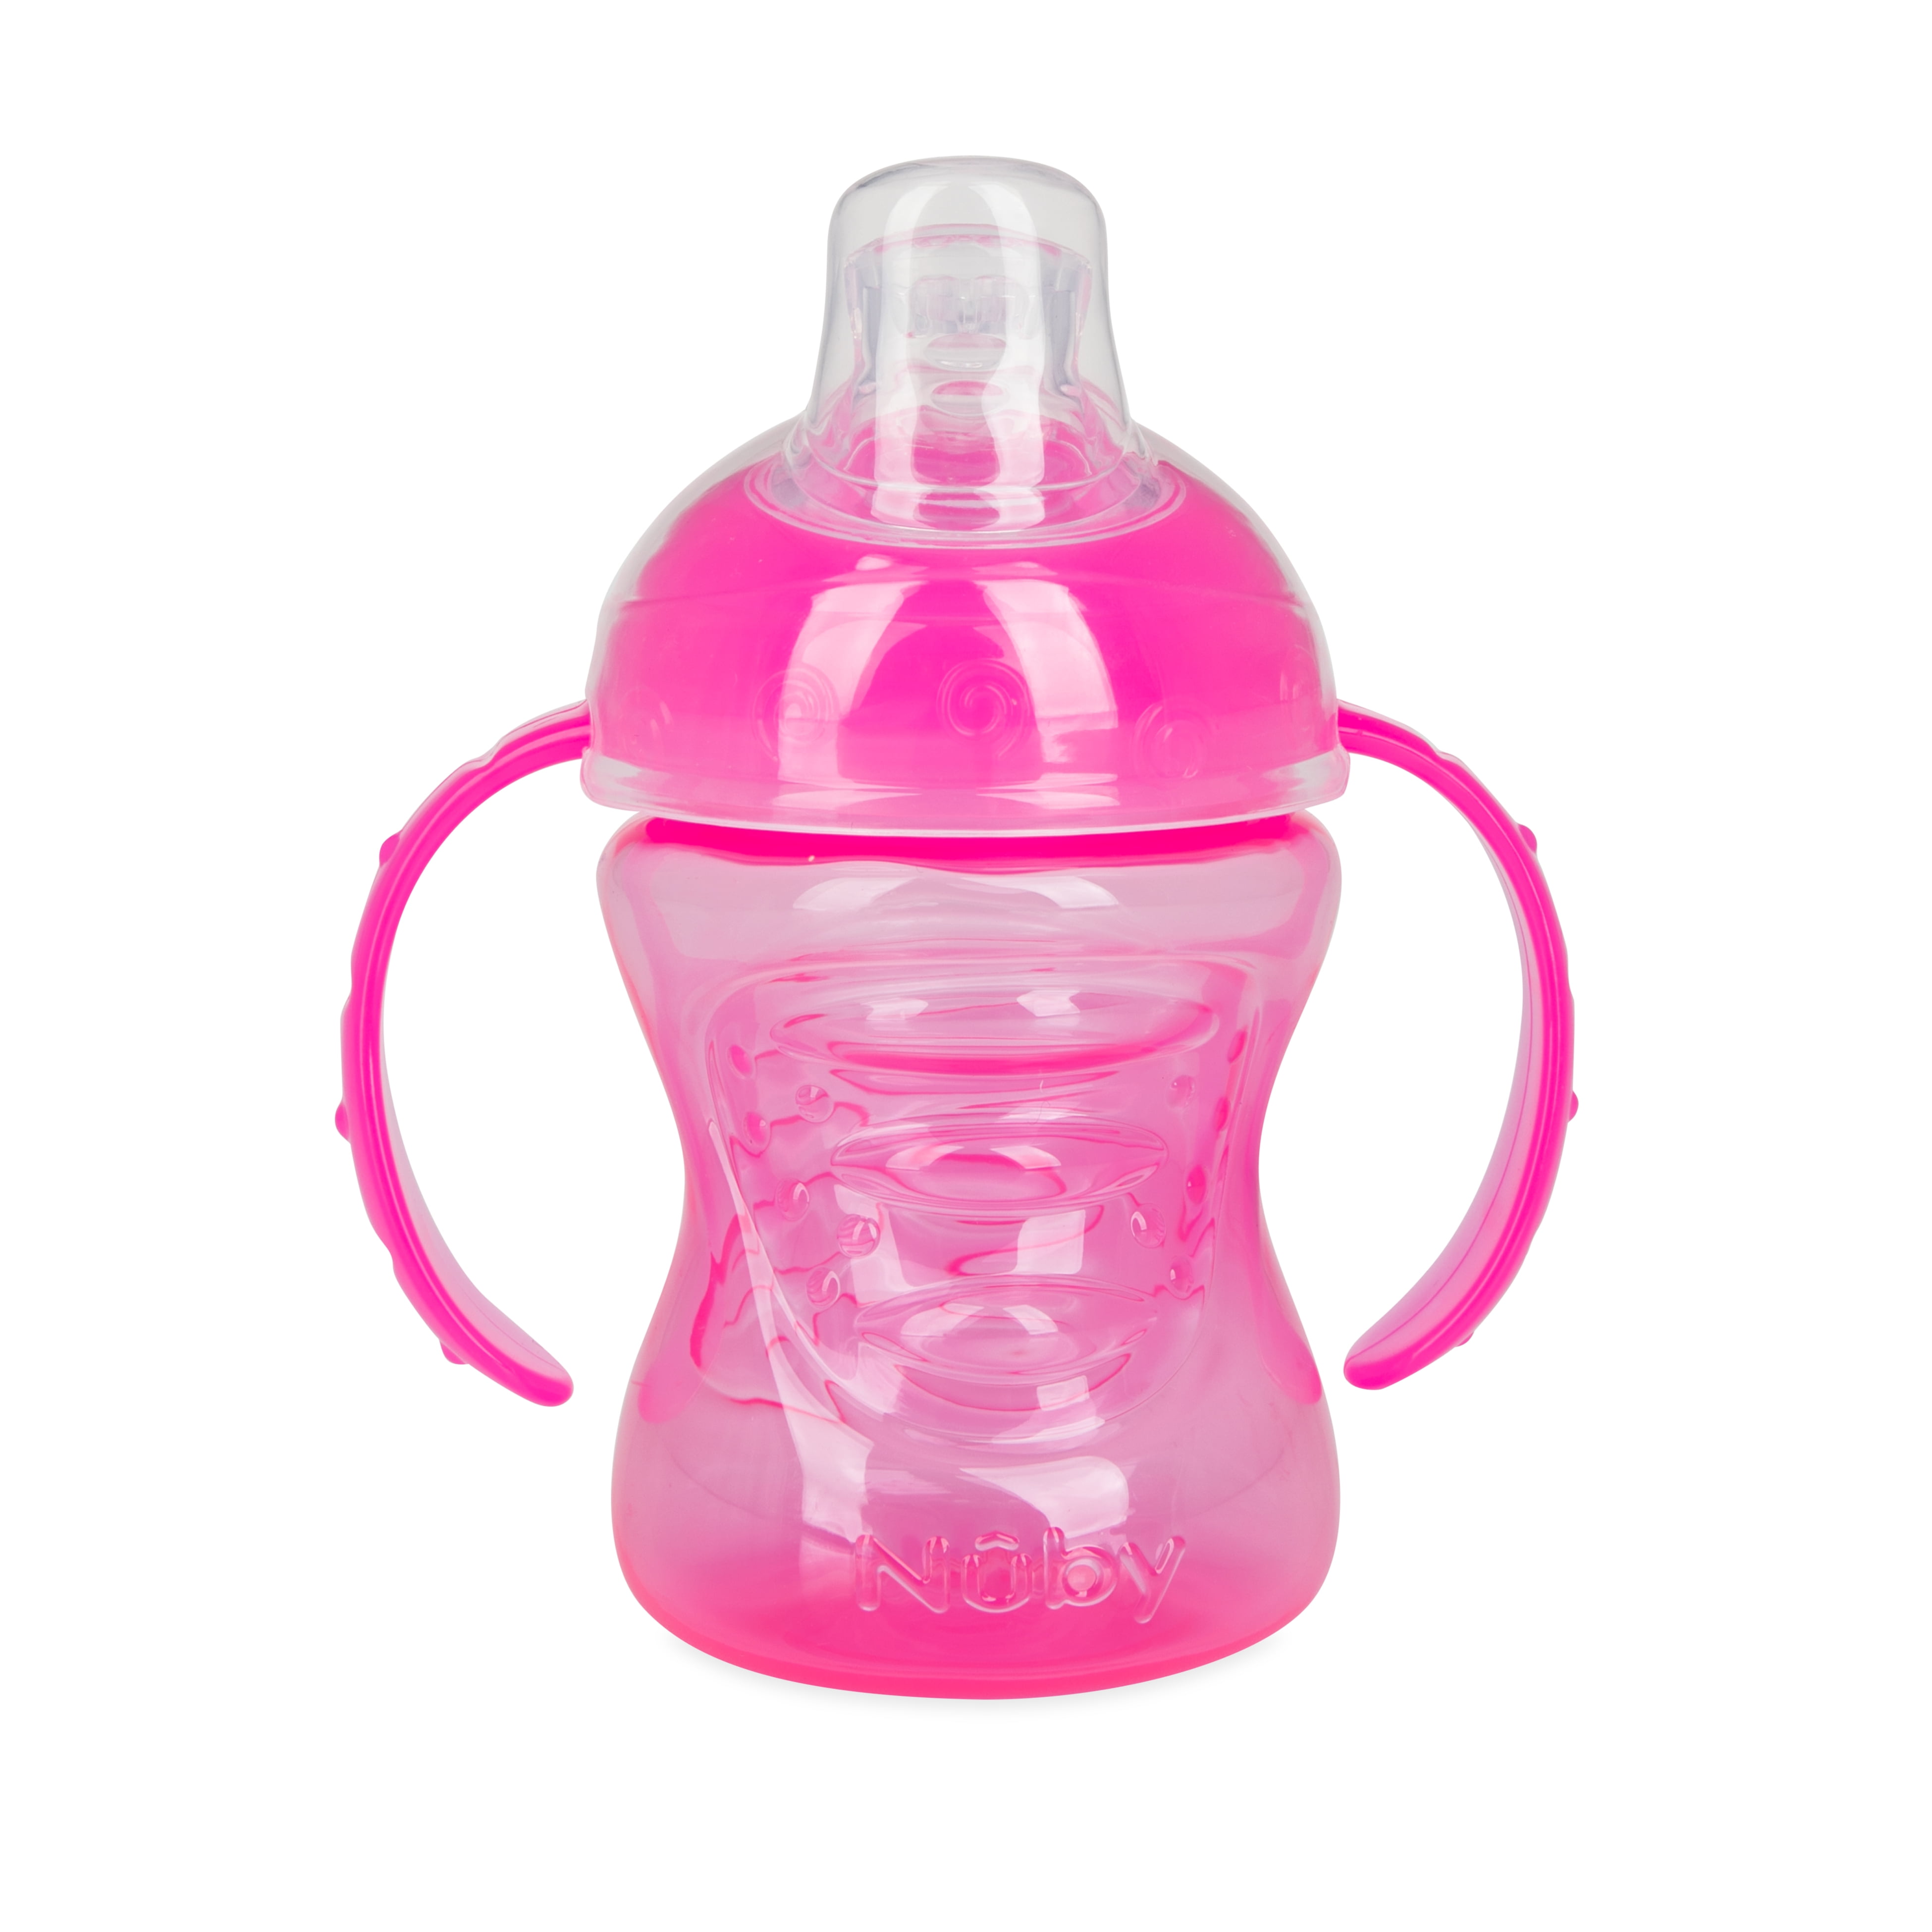 Nuby 2 Handle 8oz Pink Sippy Cup with Silicone Spout